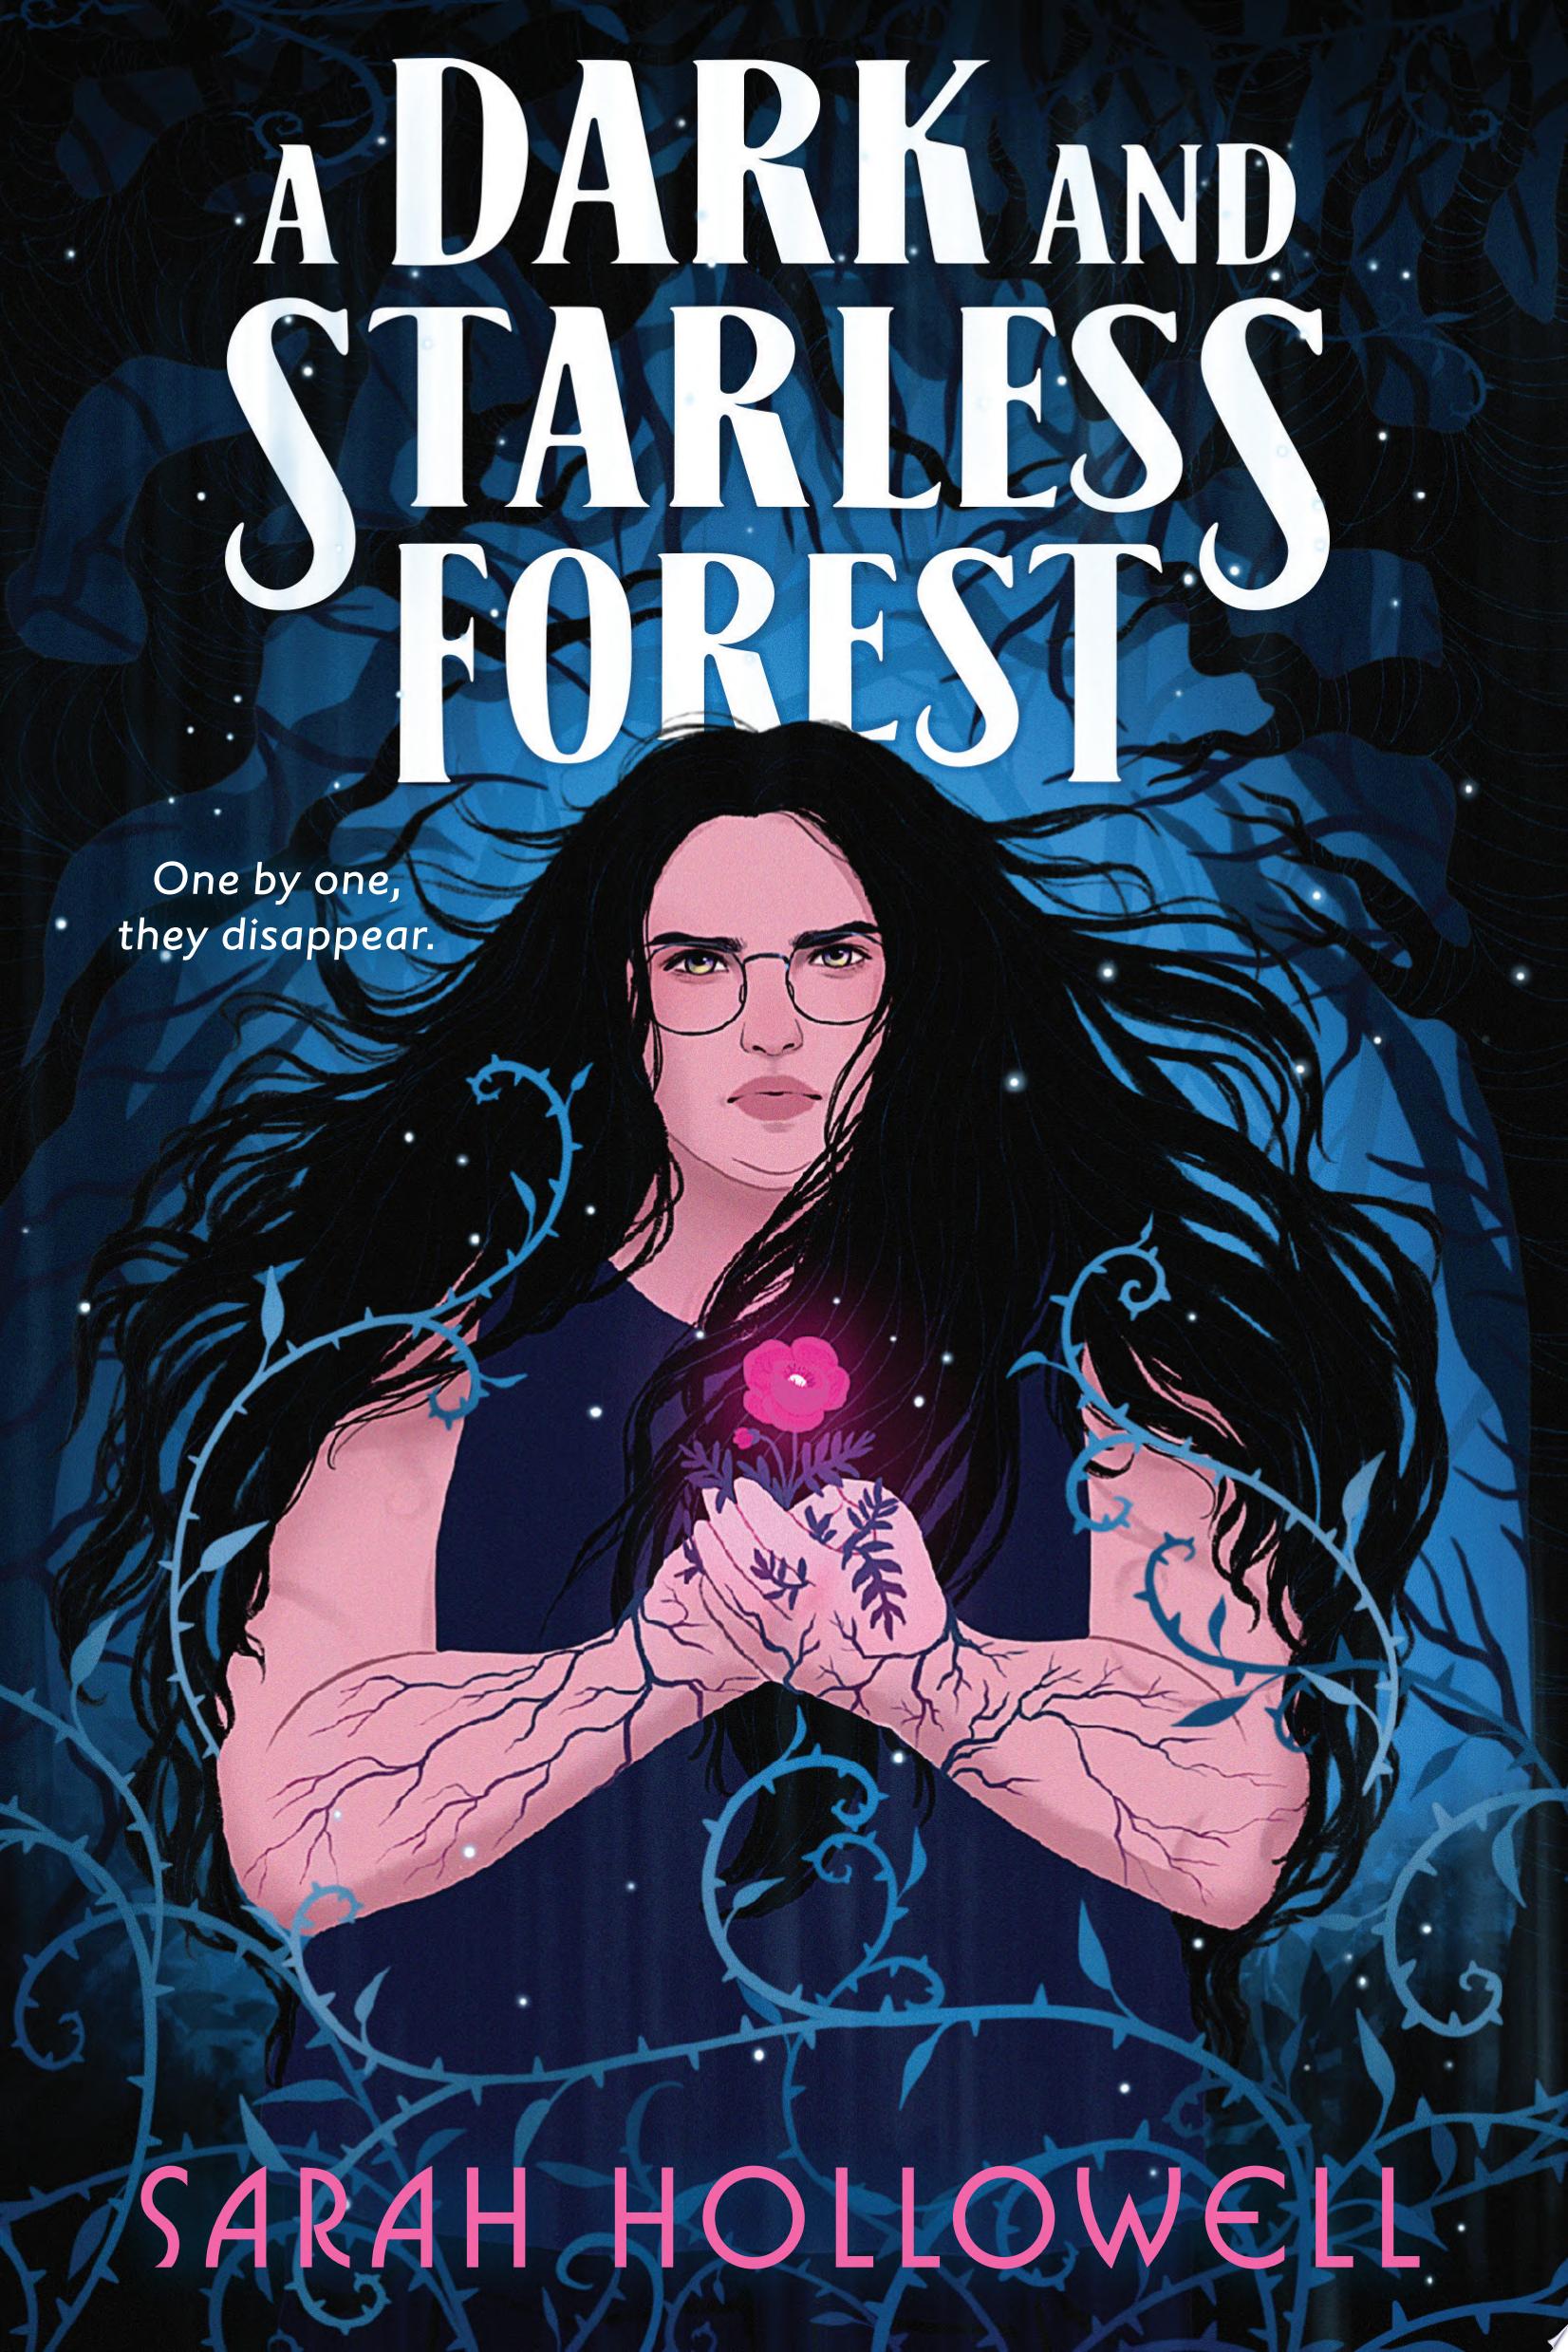 Image for "A Dark and Starless Forest"